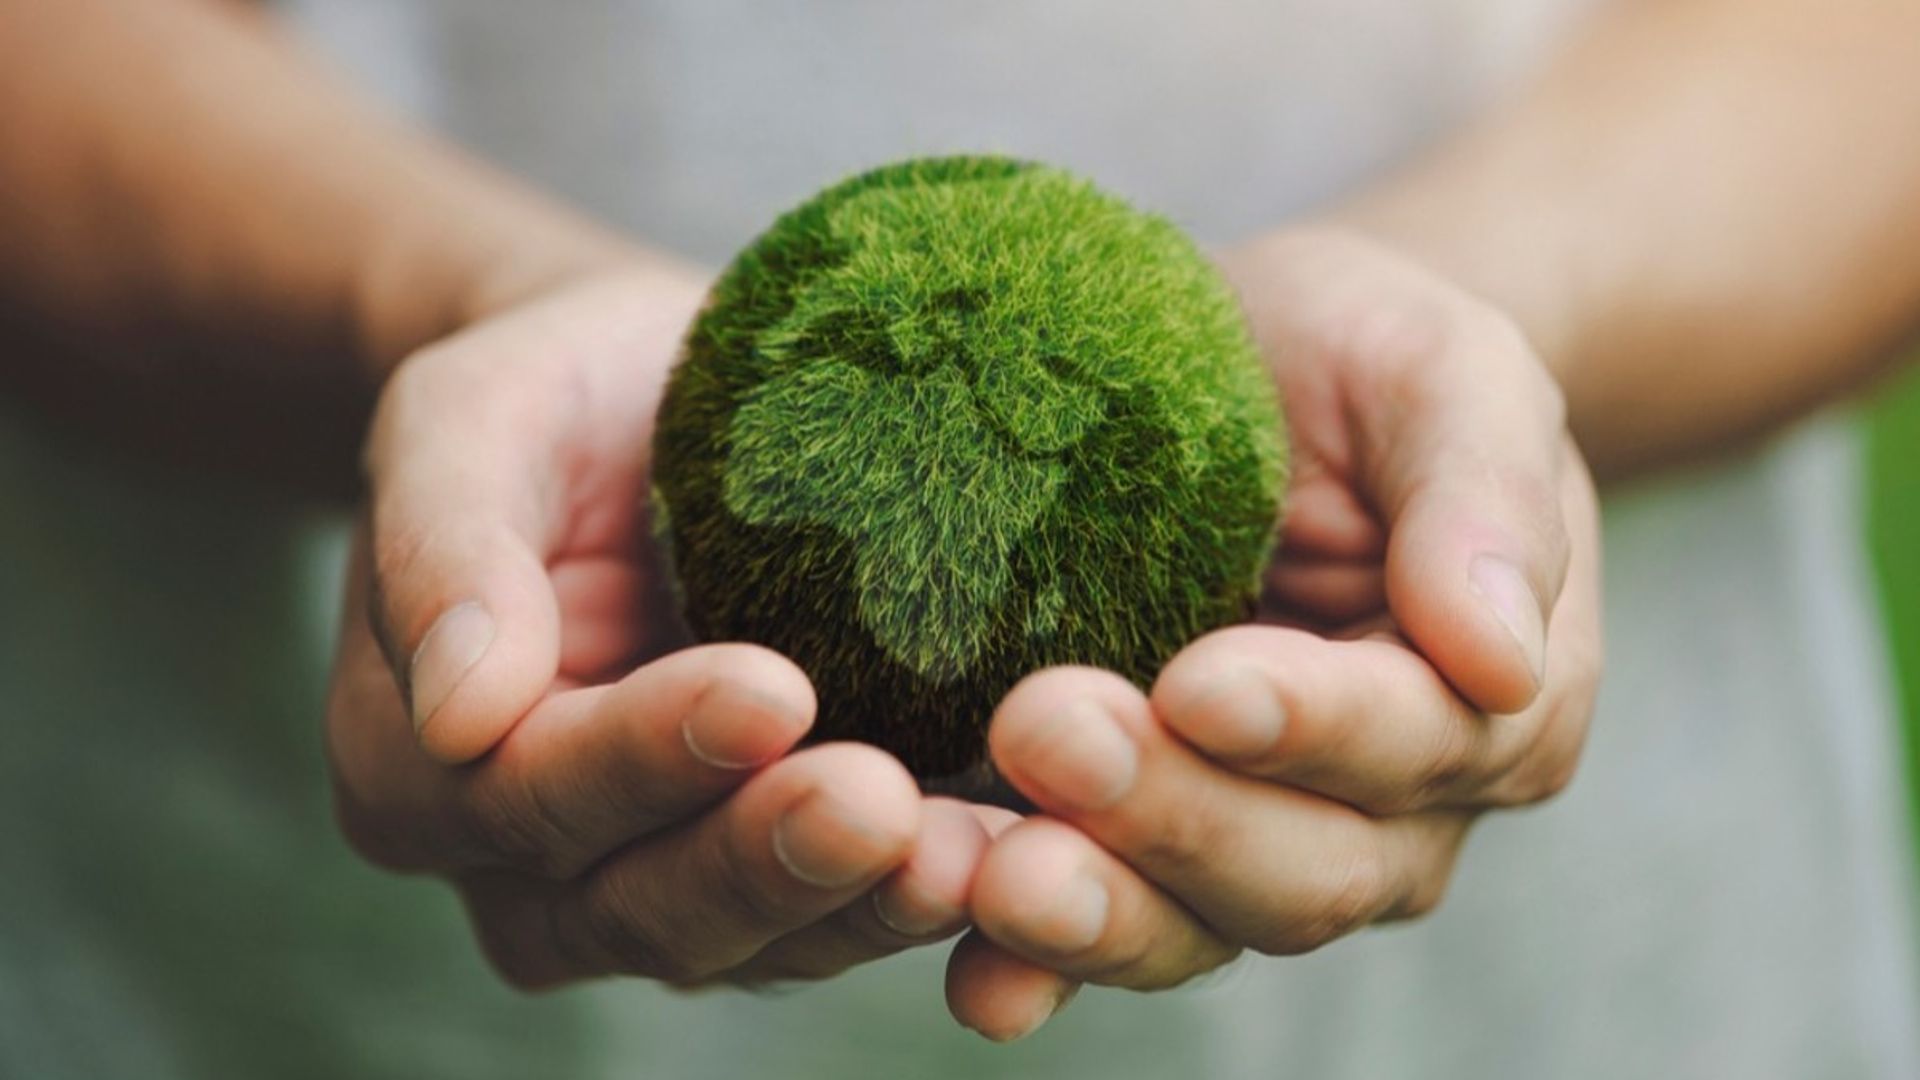 Image of a person holding a green globe